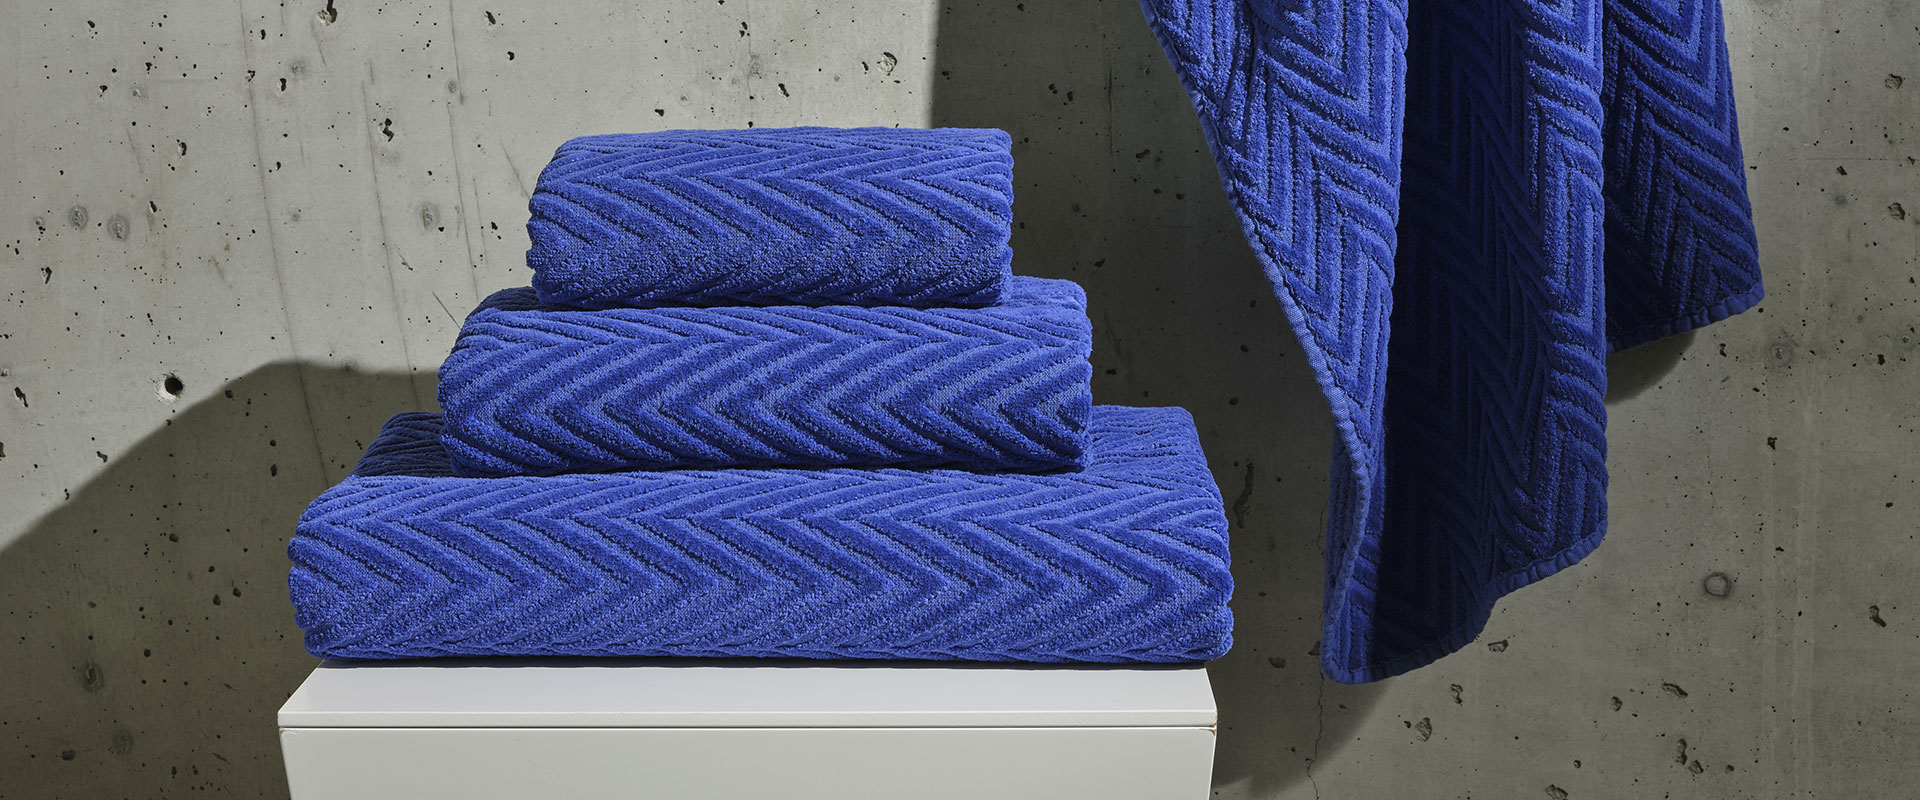 Abyss & Habidecor | Towels